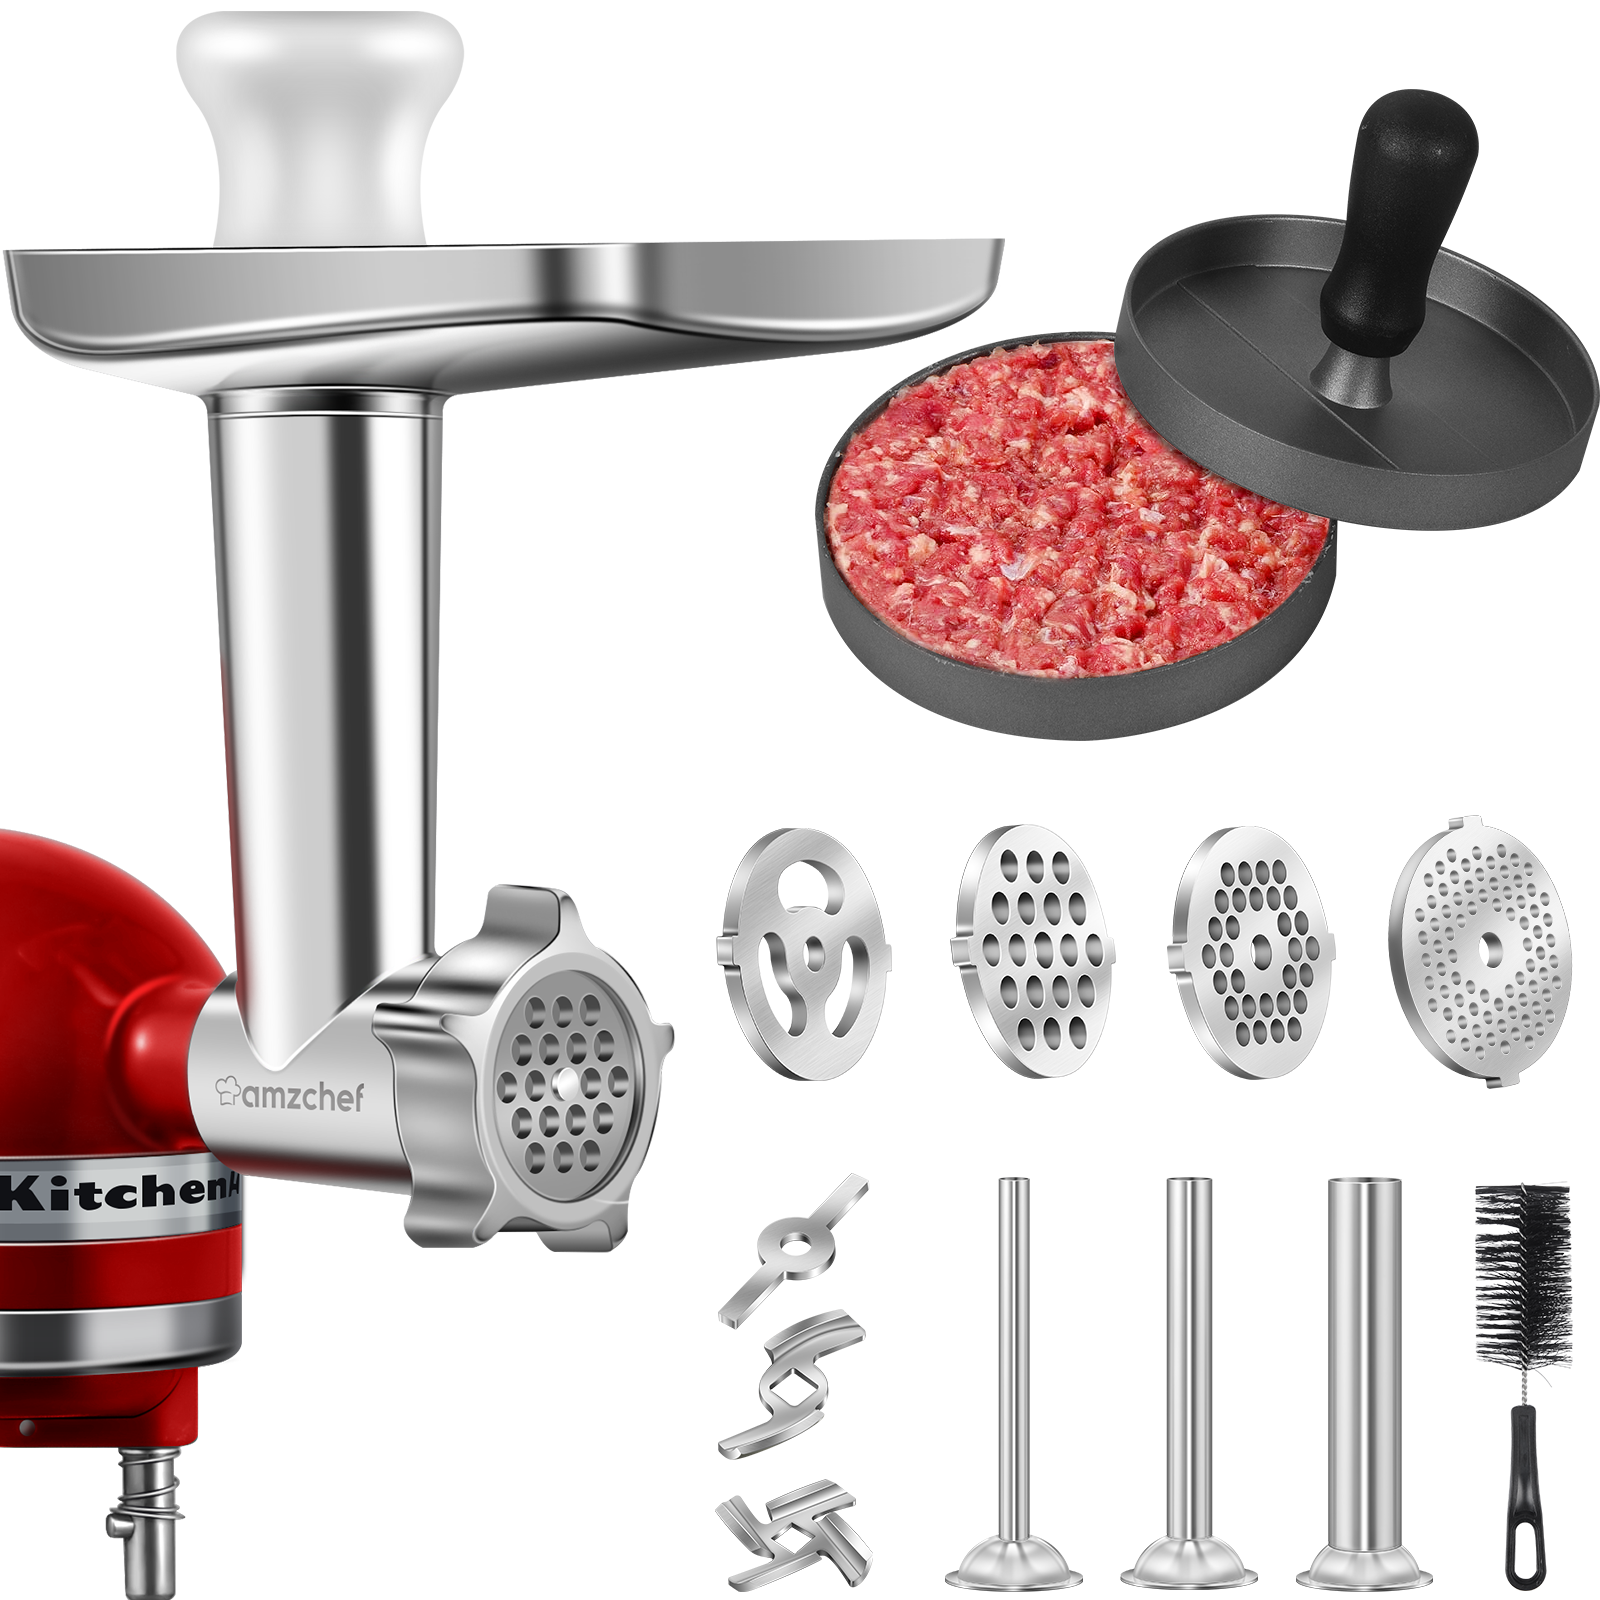 Metal Food Grinder Attachment for KitchenAid Stand Mixers HOZODO Meat  Grinder, Sausage Stuffer, Great Attachment for KitchenAid Mixers, Including  3